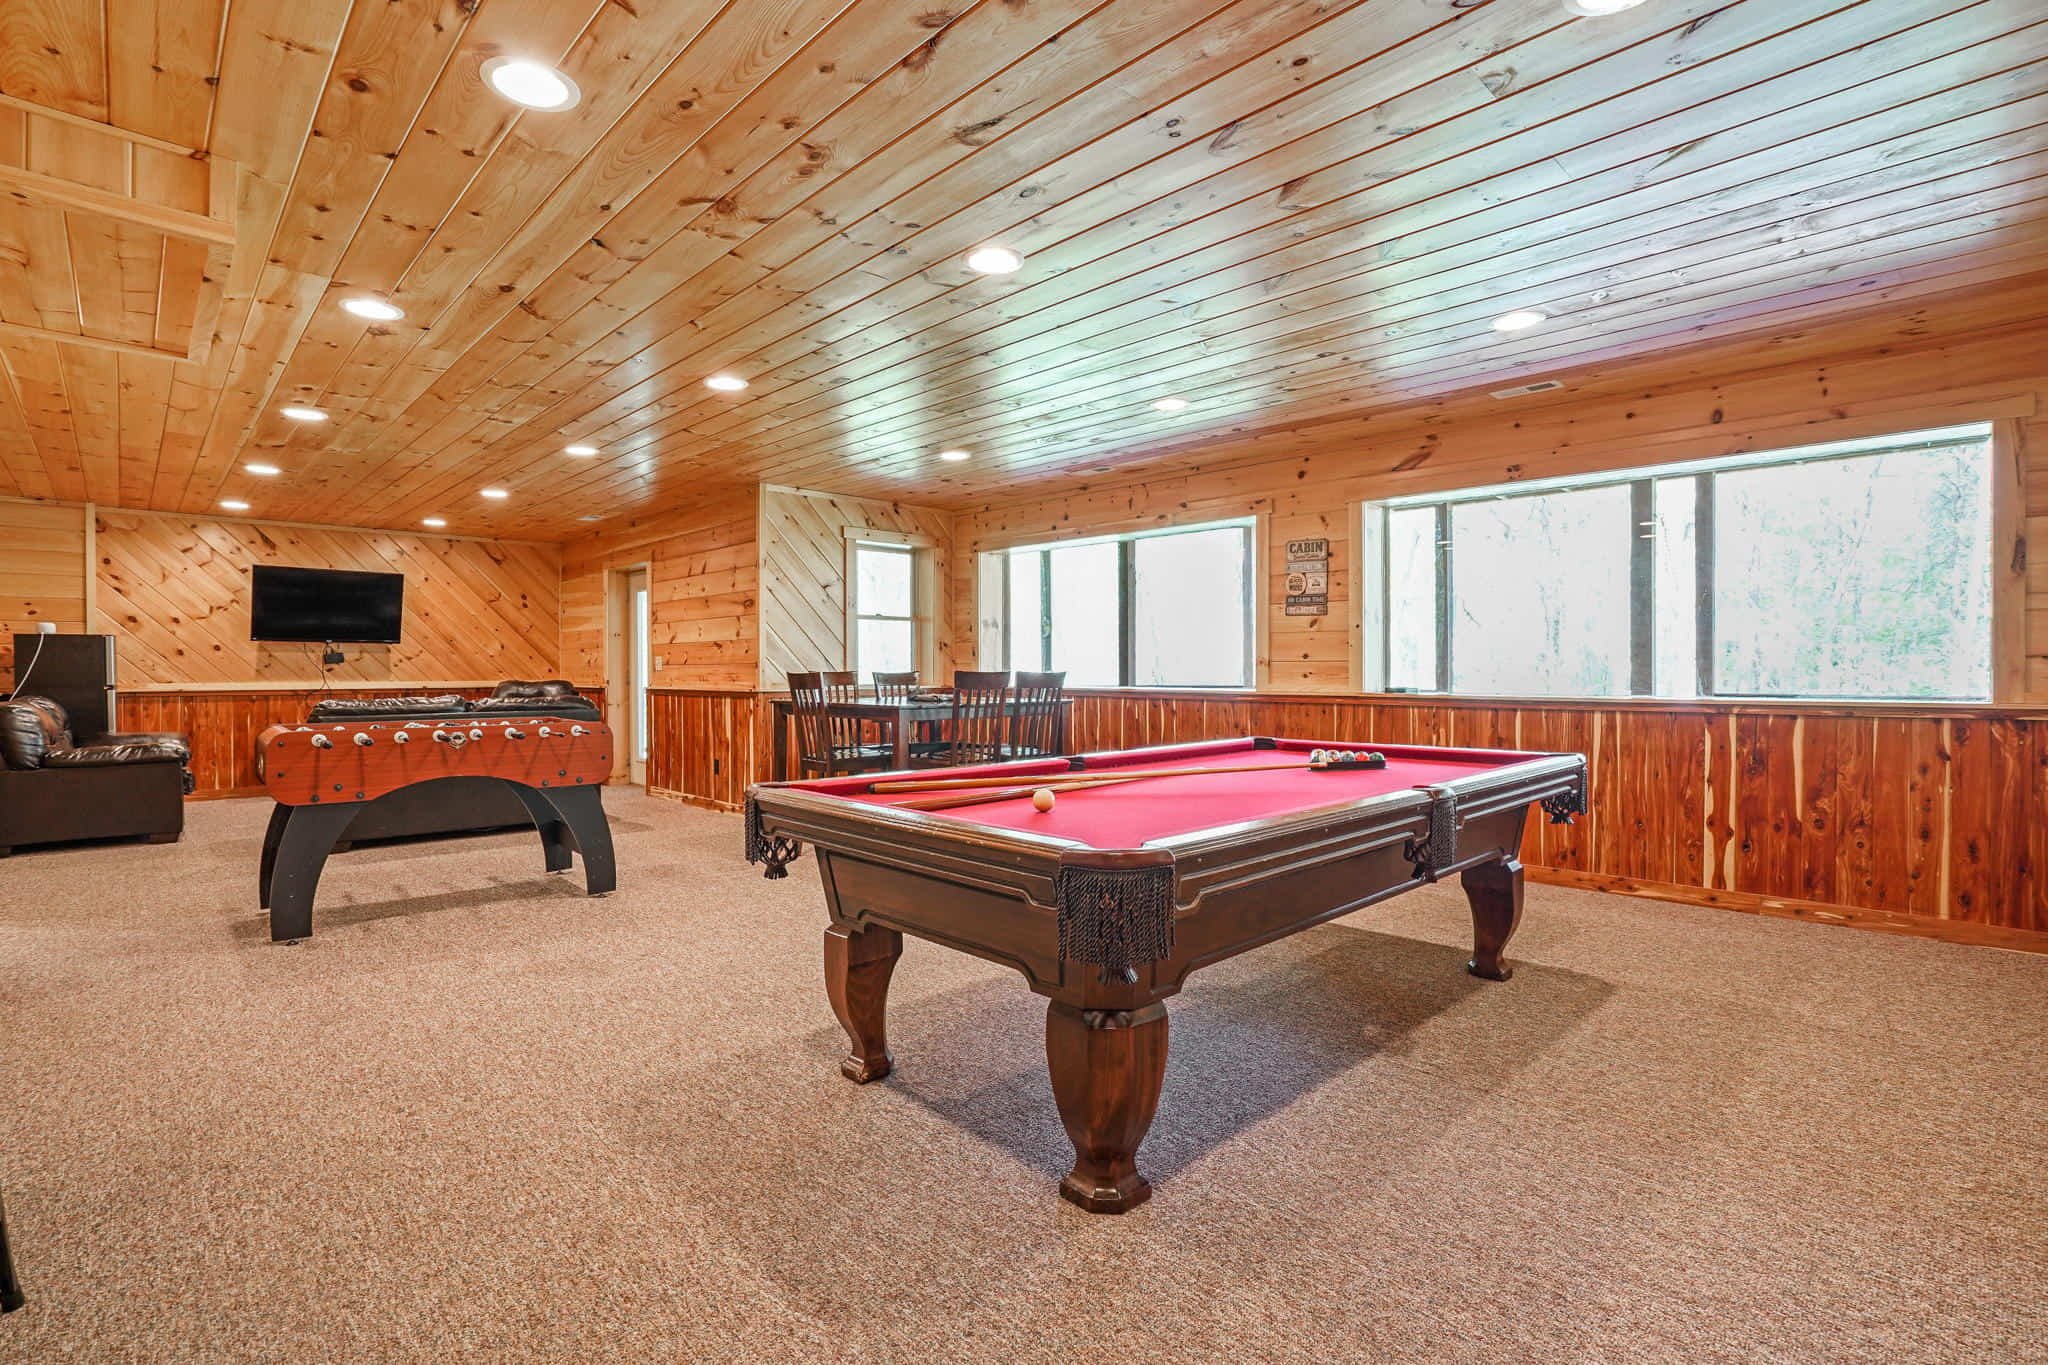 Game Room in River Rock Lodge of Hocking Hills Ohio